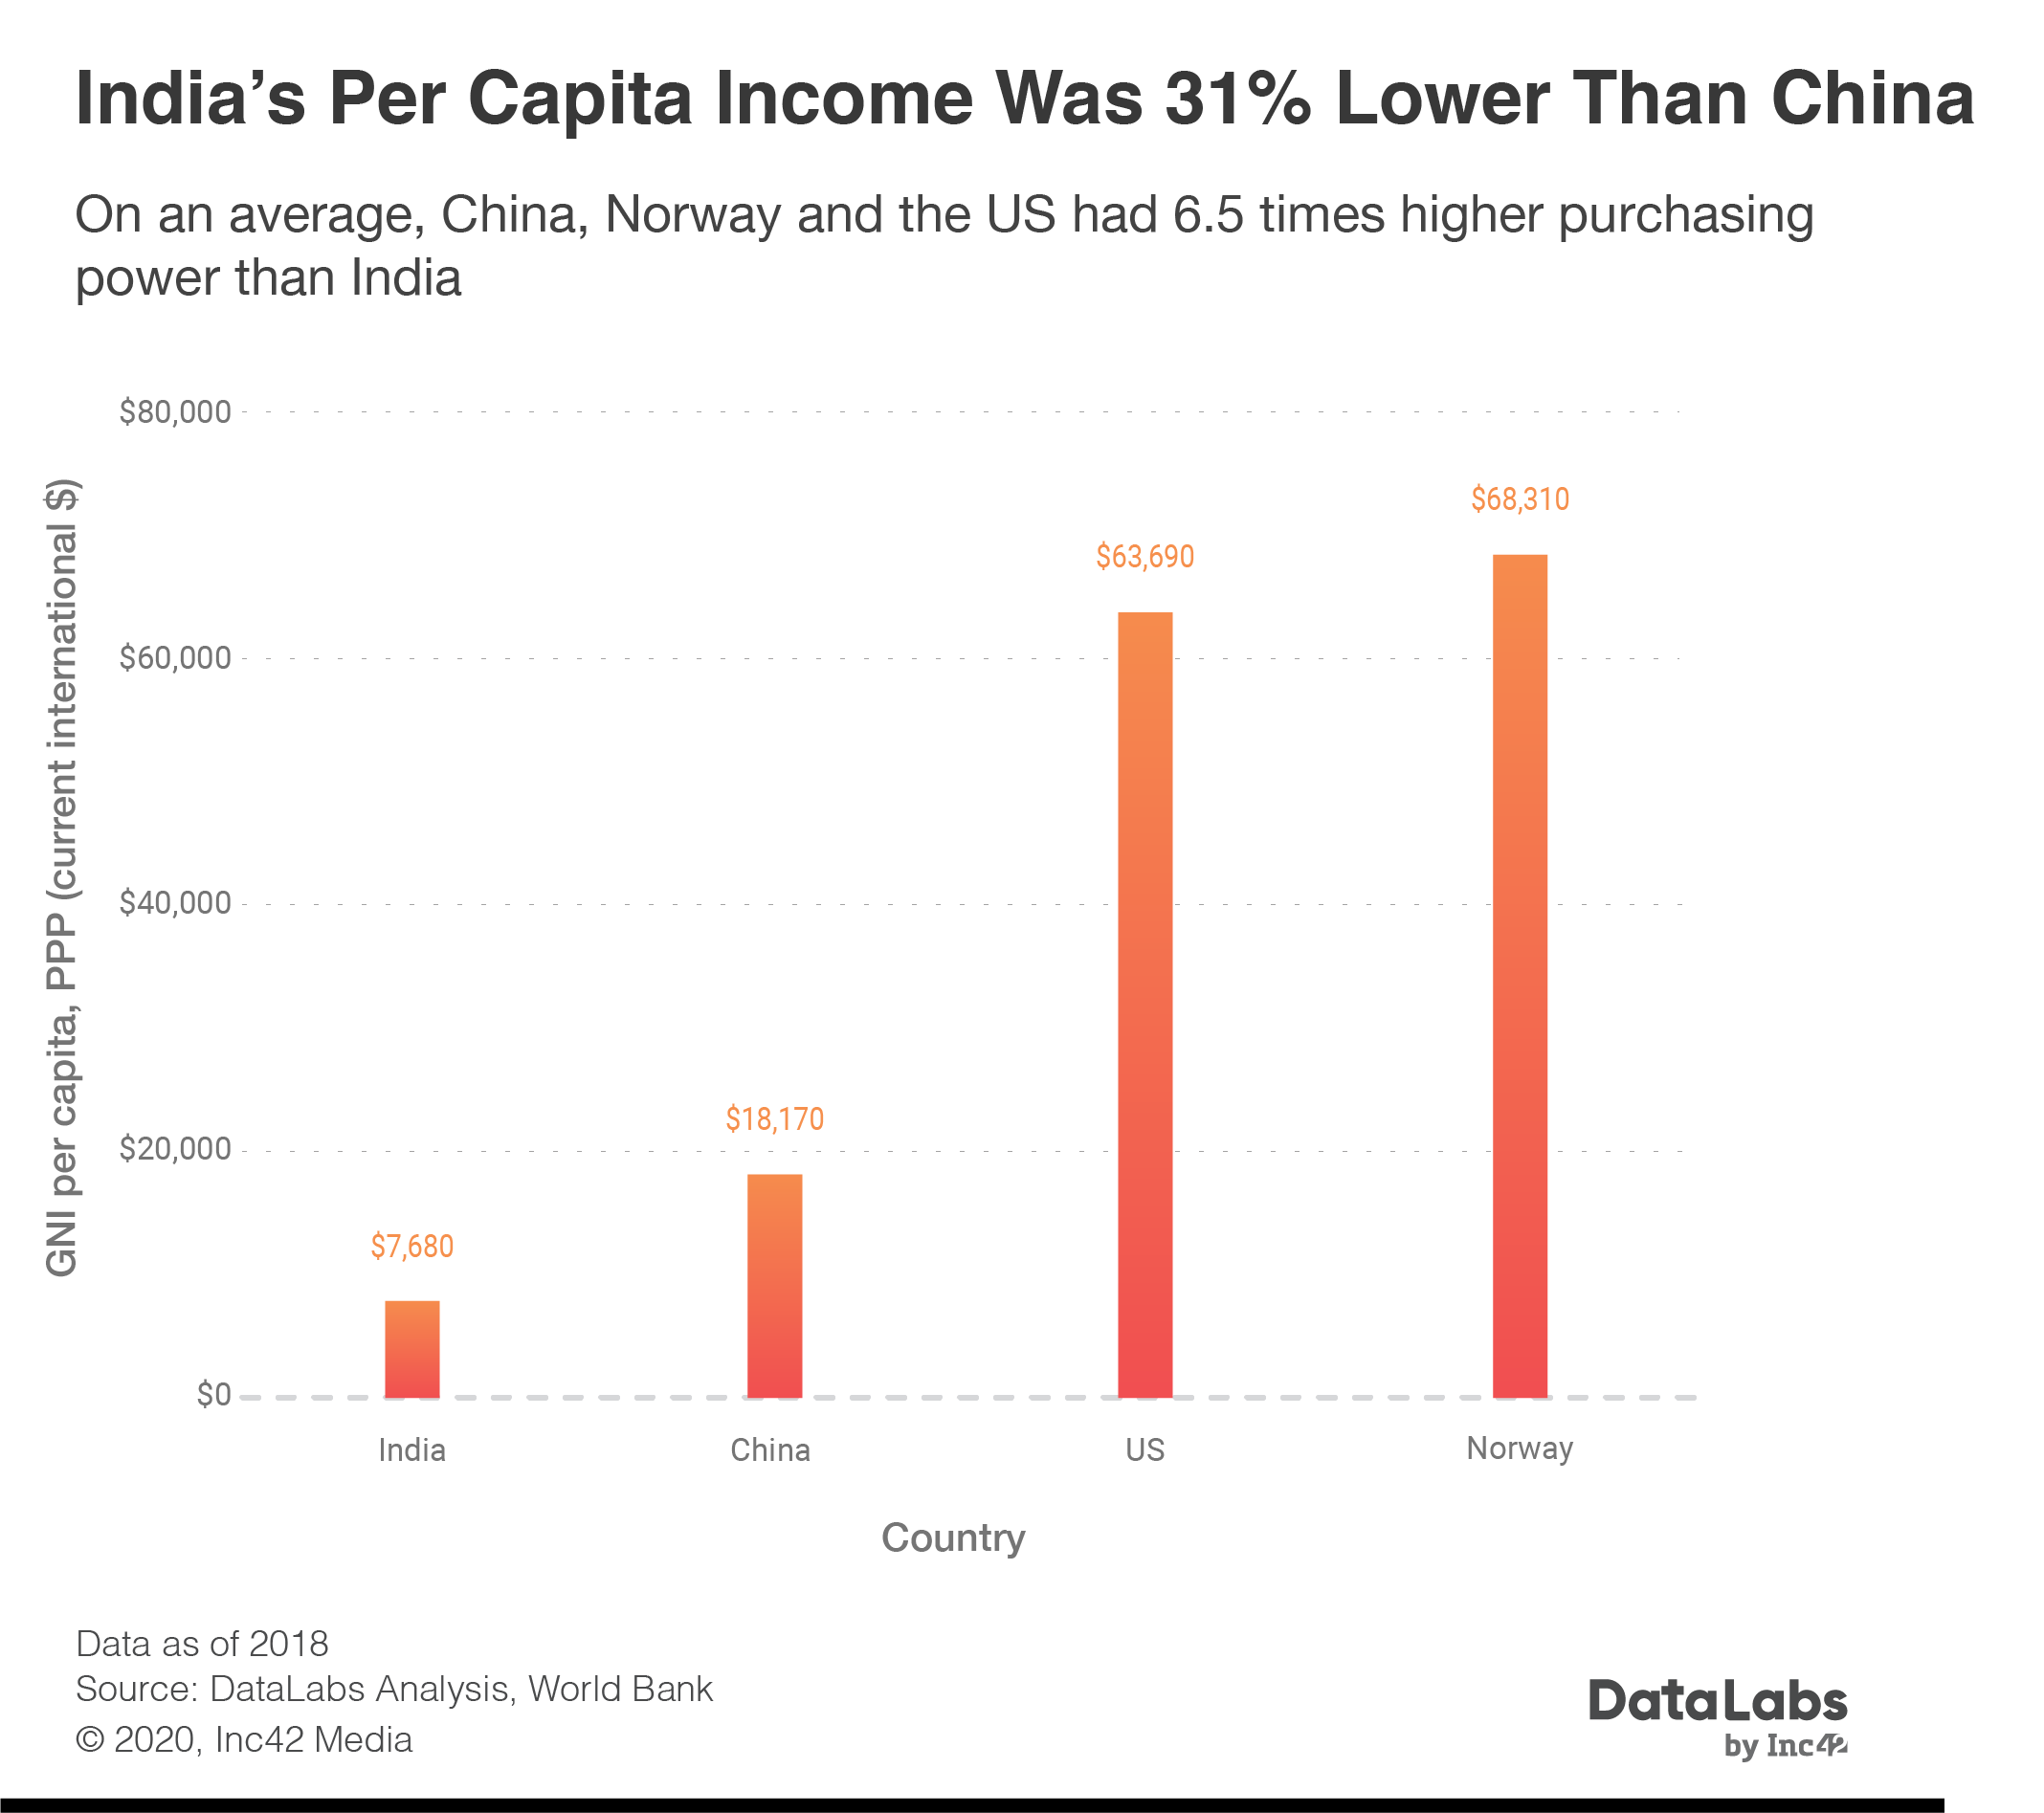 India's per capita income was 31% lower than China